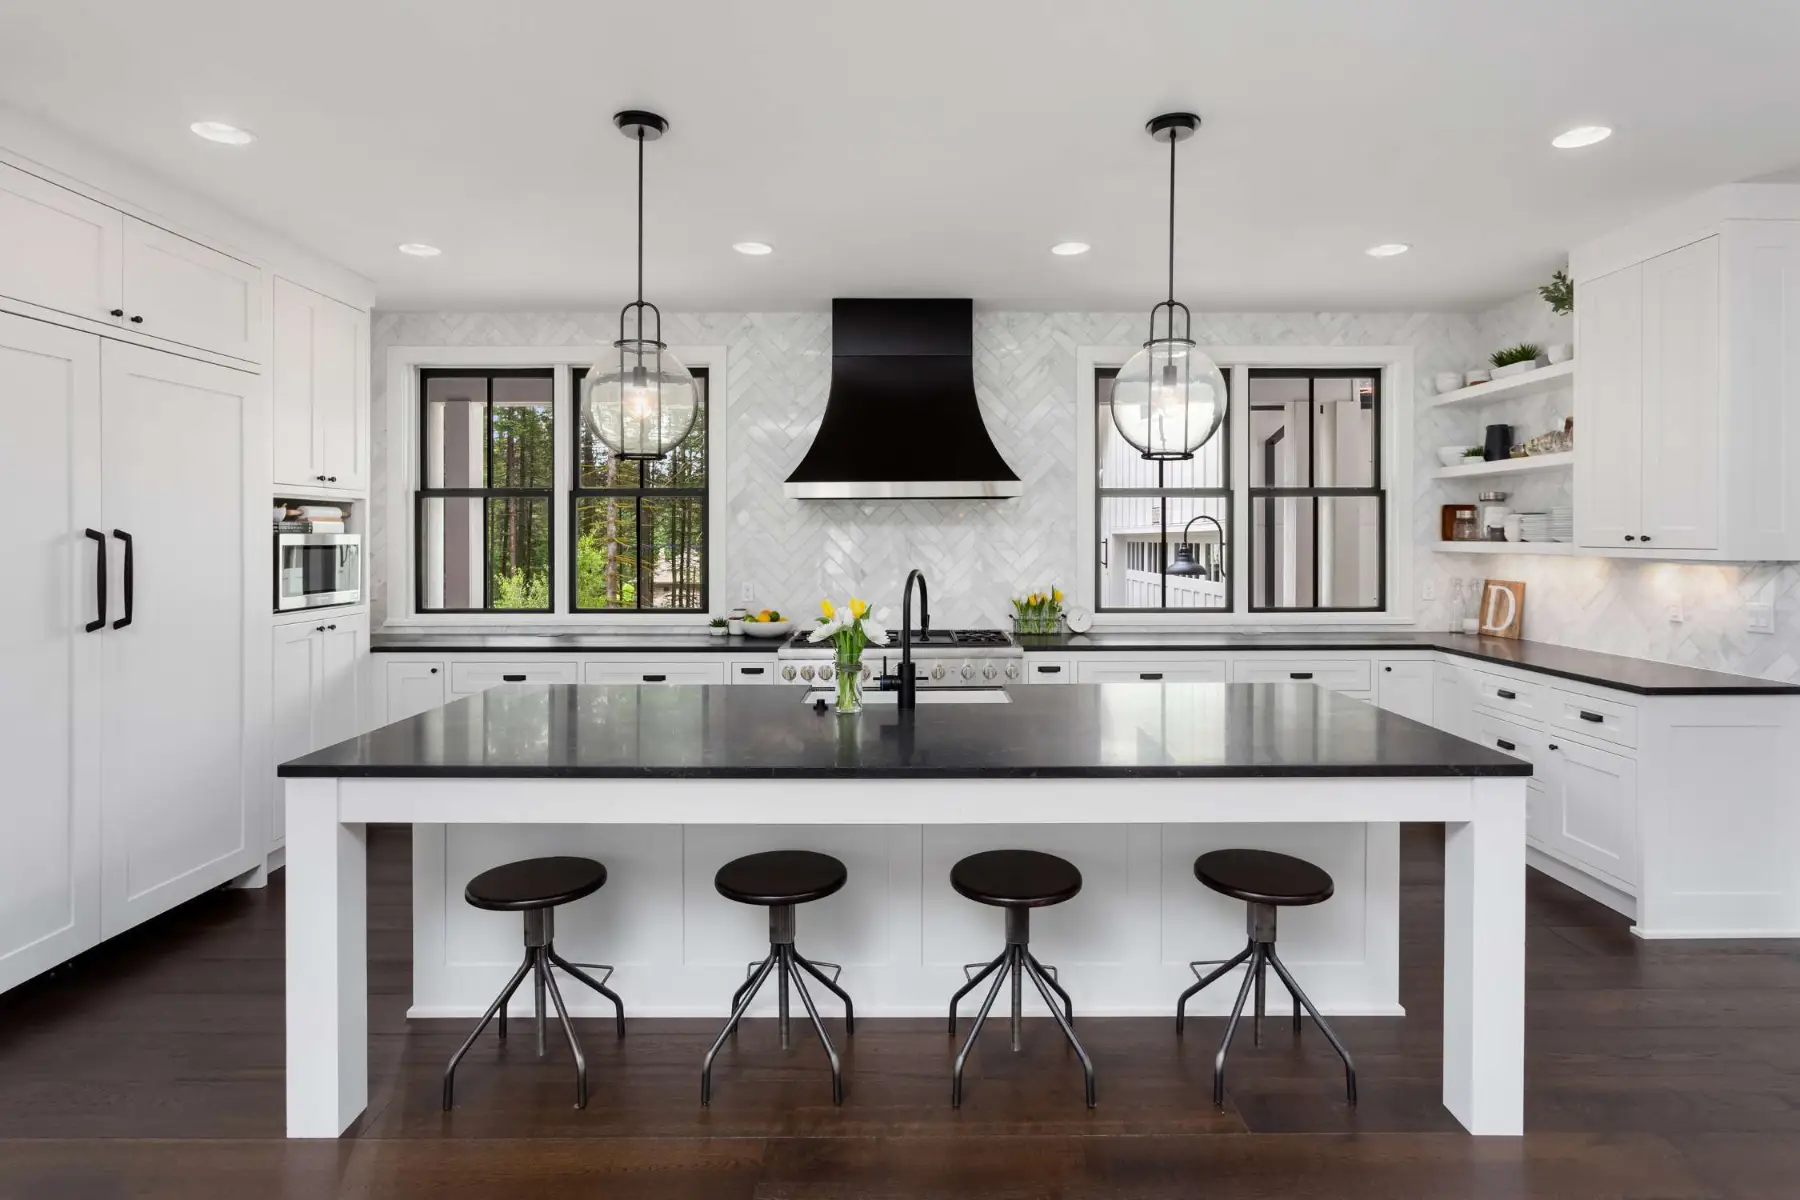 White kitchen cabinets with black countertops ▷ Walls and floor ...